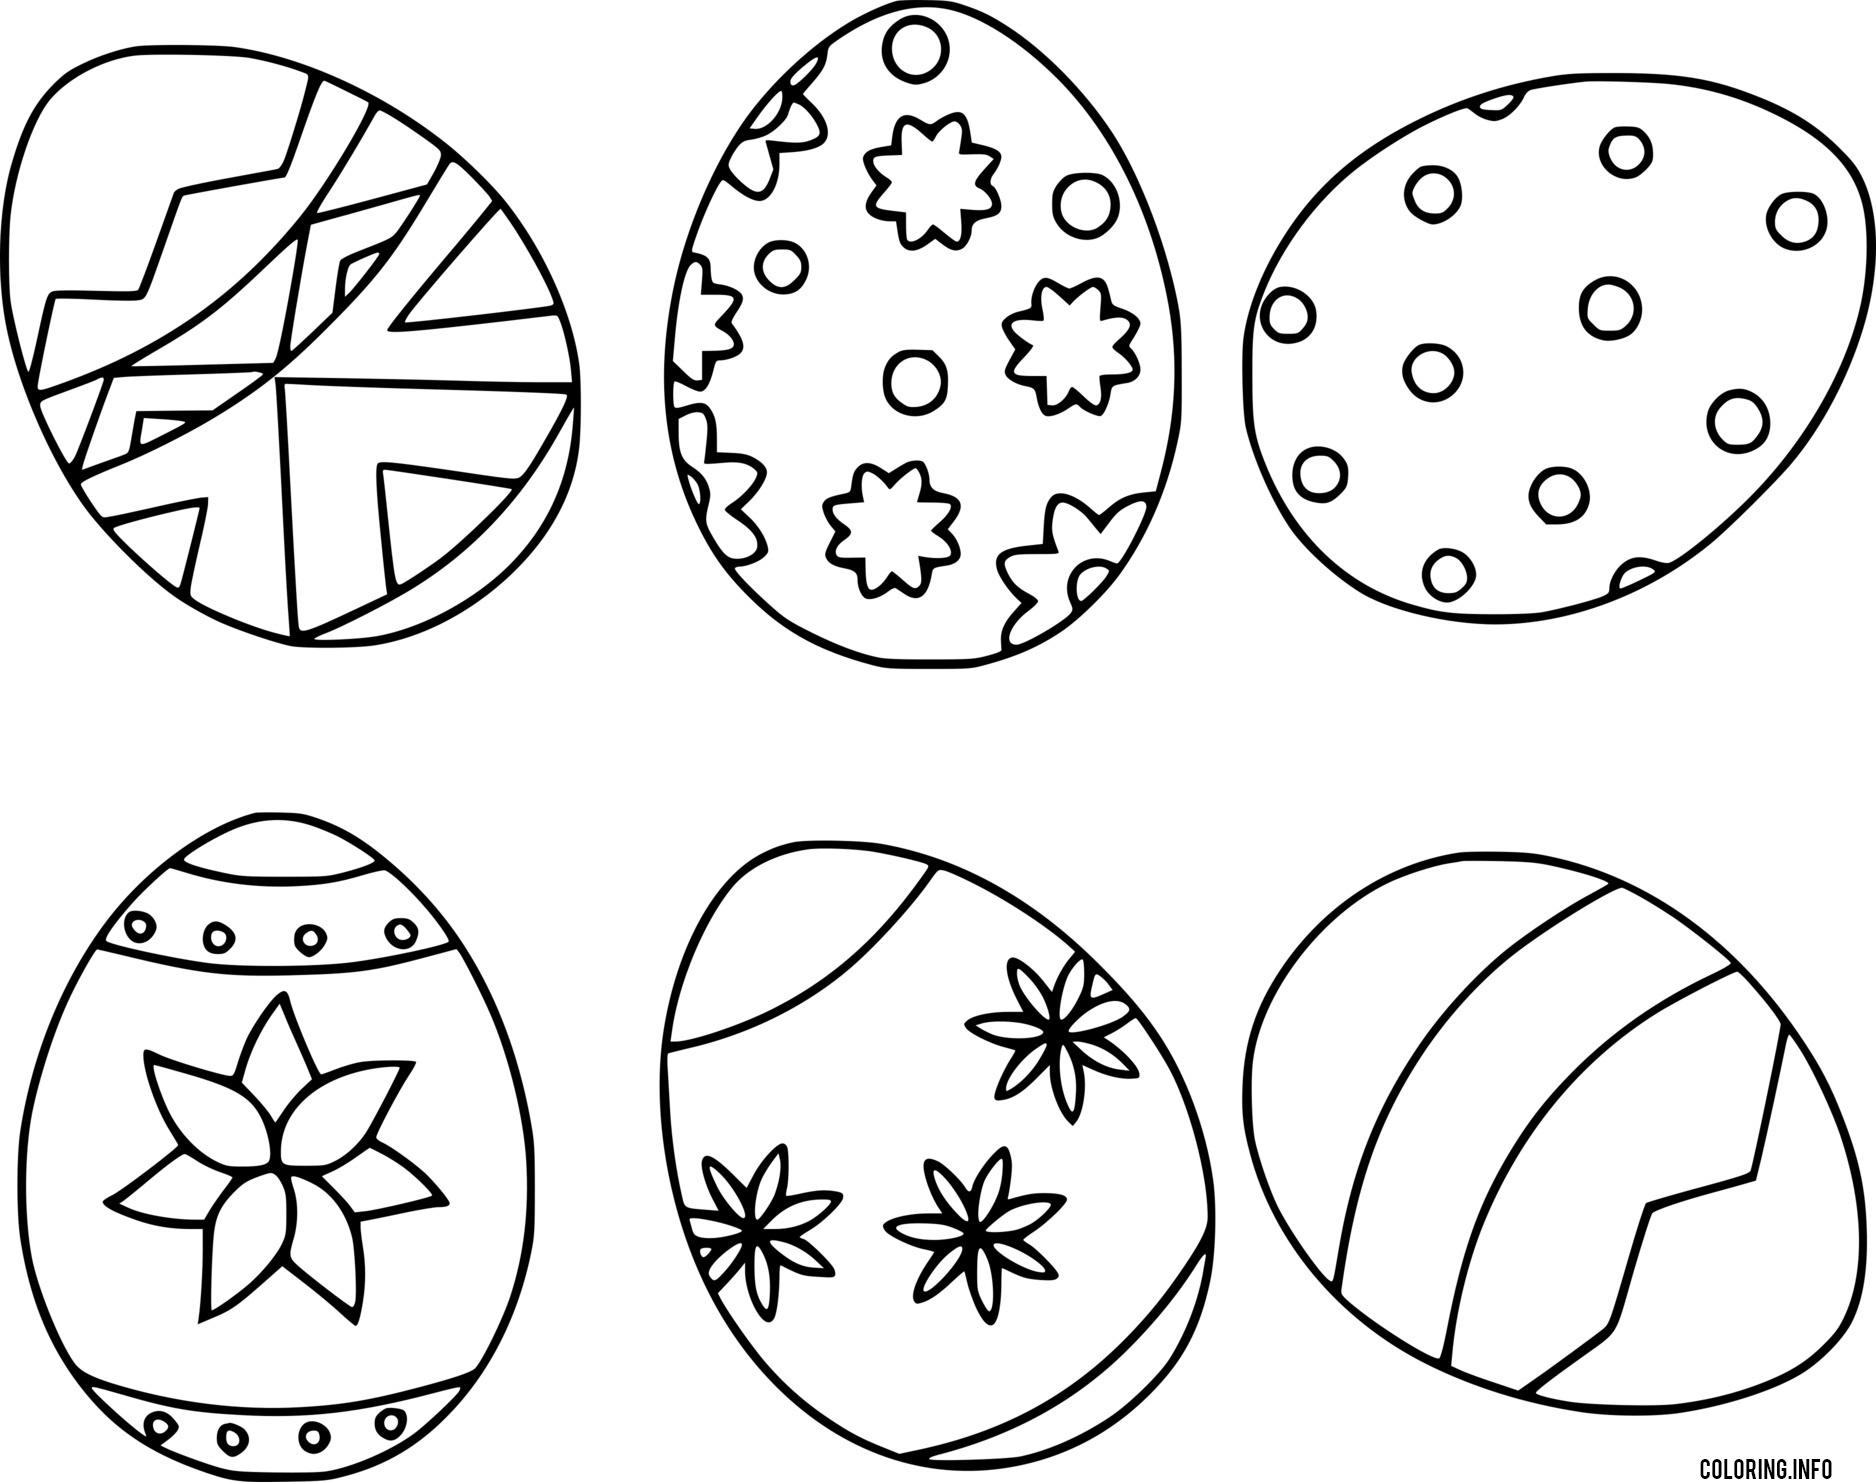 Six Easter Eggs With Patterns coloring